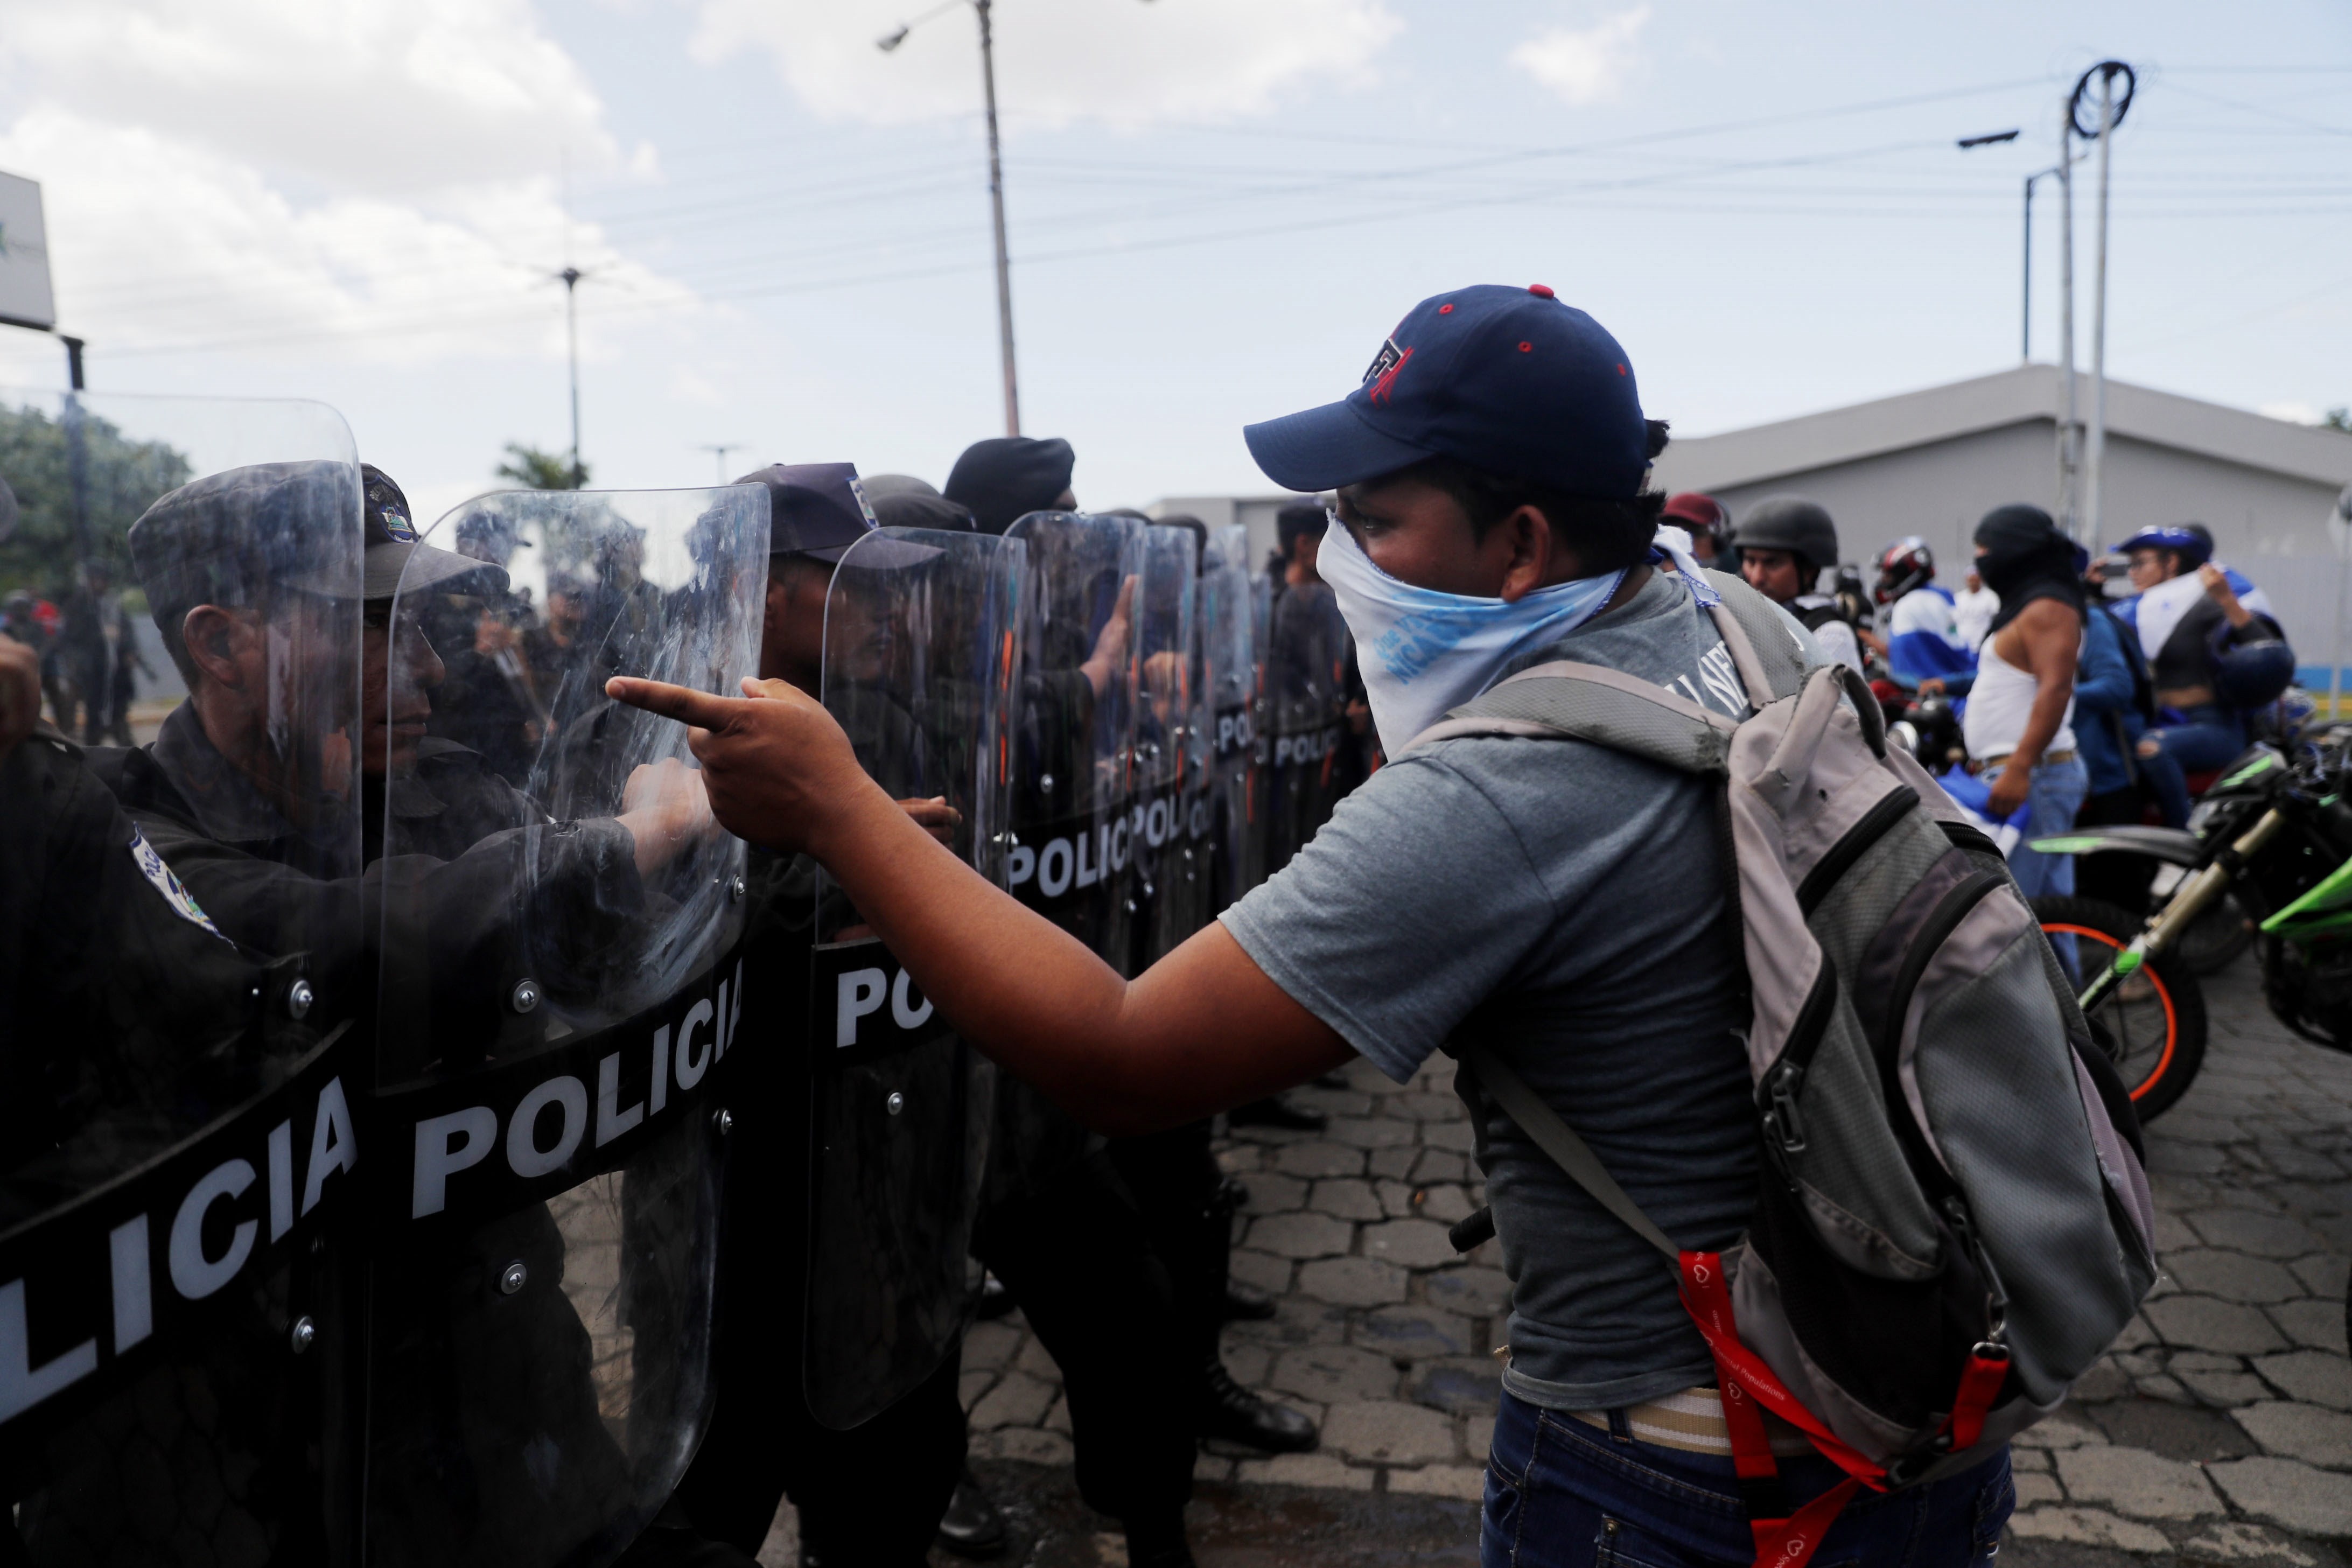 Protesters face off with riot police during a march called "Rescue the Homeland" in protest against President Daniel Ortega in Managua, Nicaragua, on September 16, 2018. EPA-EFE/Esteban Biba
